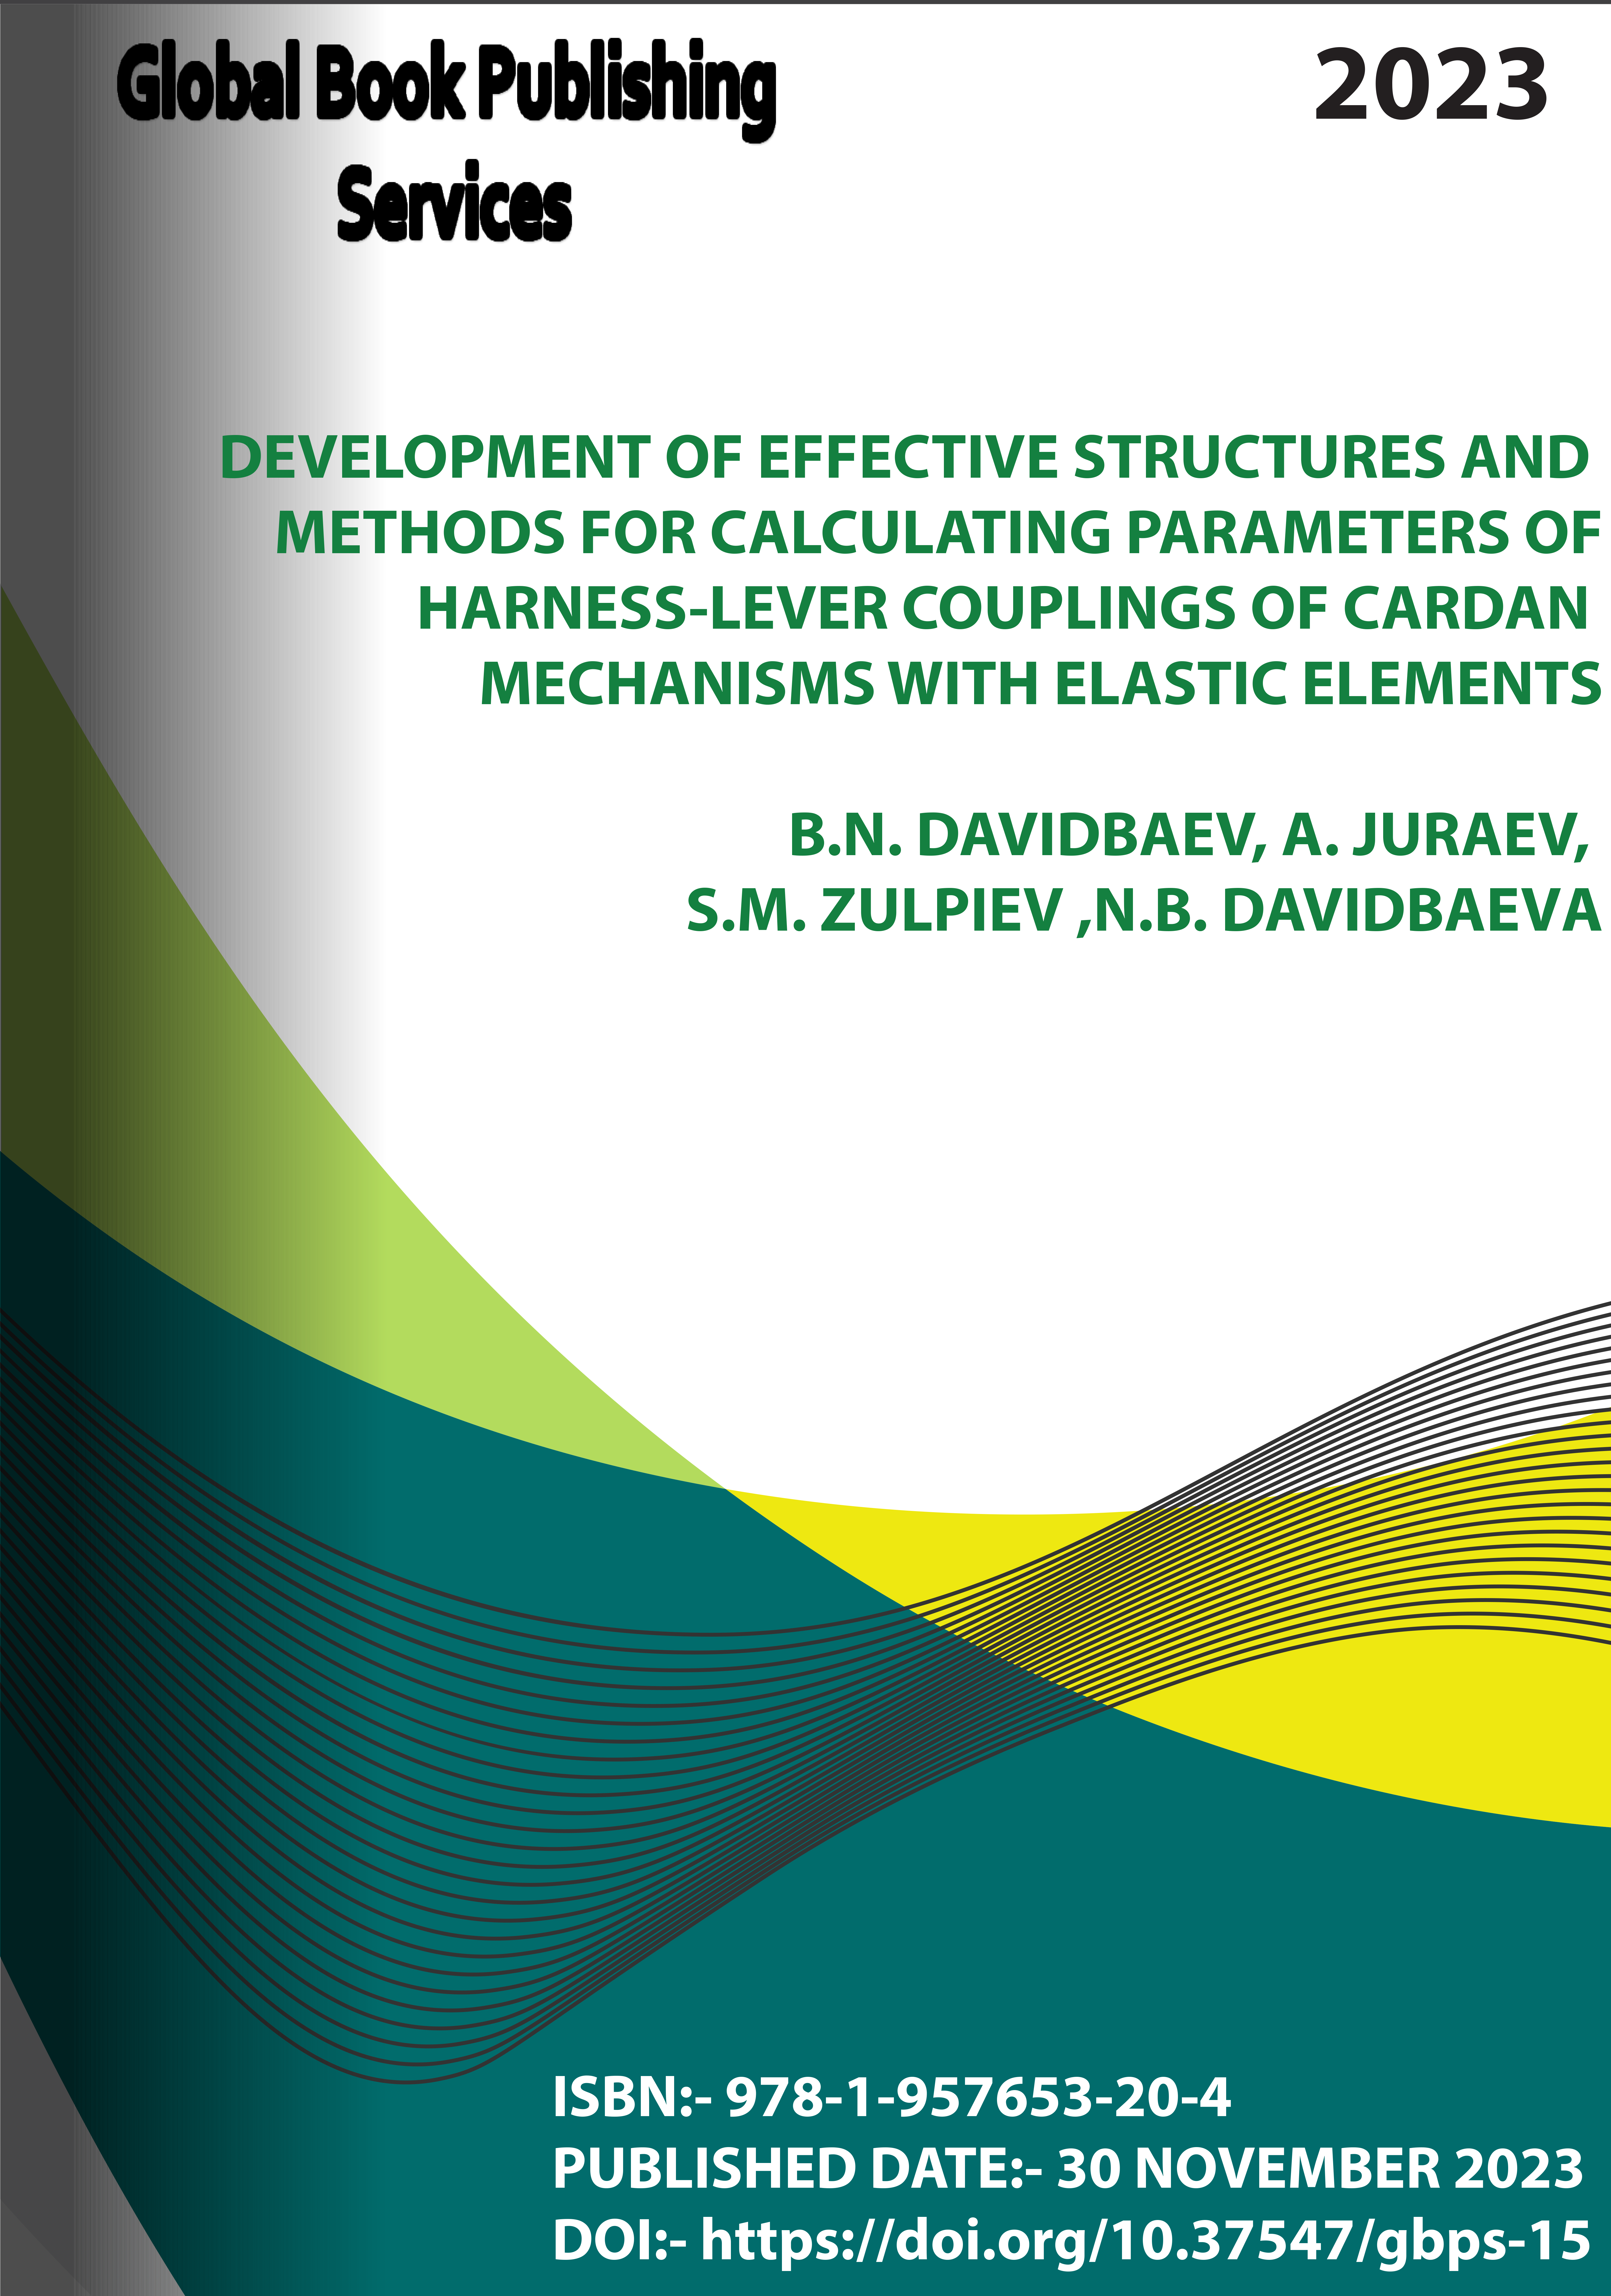 					View DEVELOPMENT OF EFFECTIVE STRUCTURES AND METHODS FOR CALCULATING PARAMETERS OF HARNESS-LEVER COUPLINGS OF CARDAN MECHANISMS WITH ELASTIC ELEMENTS
				